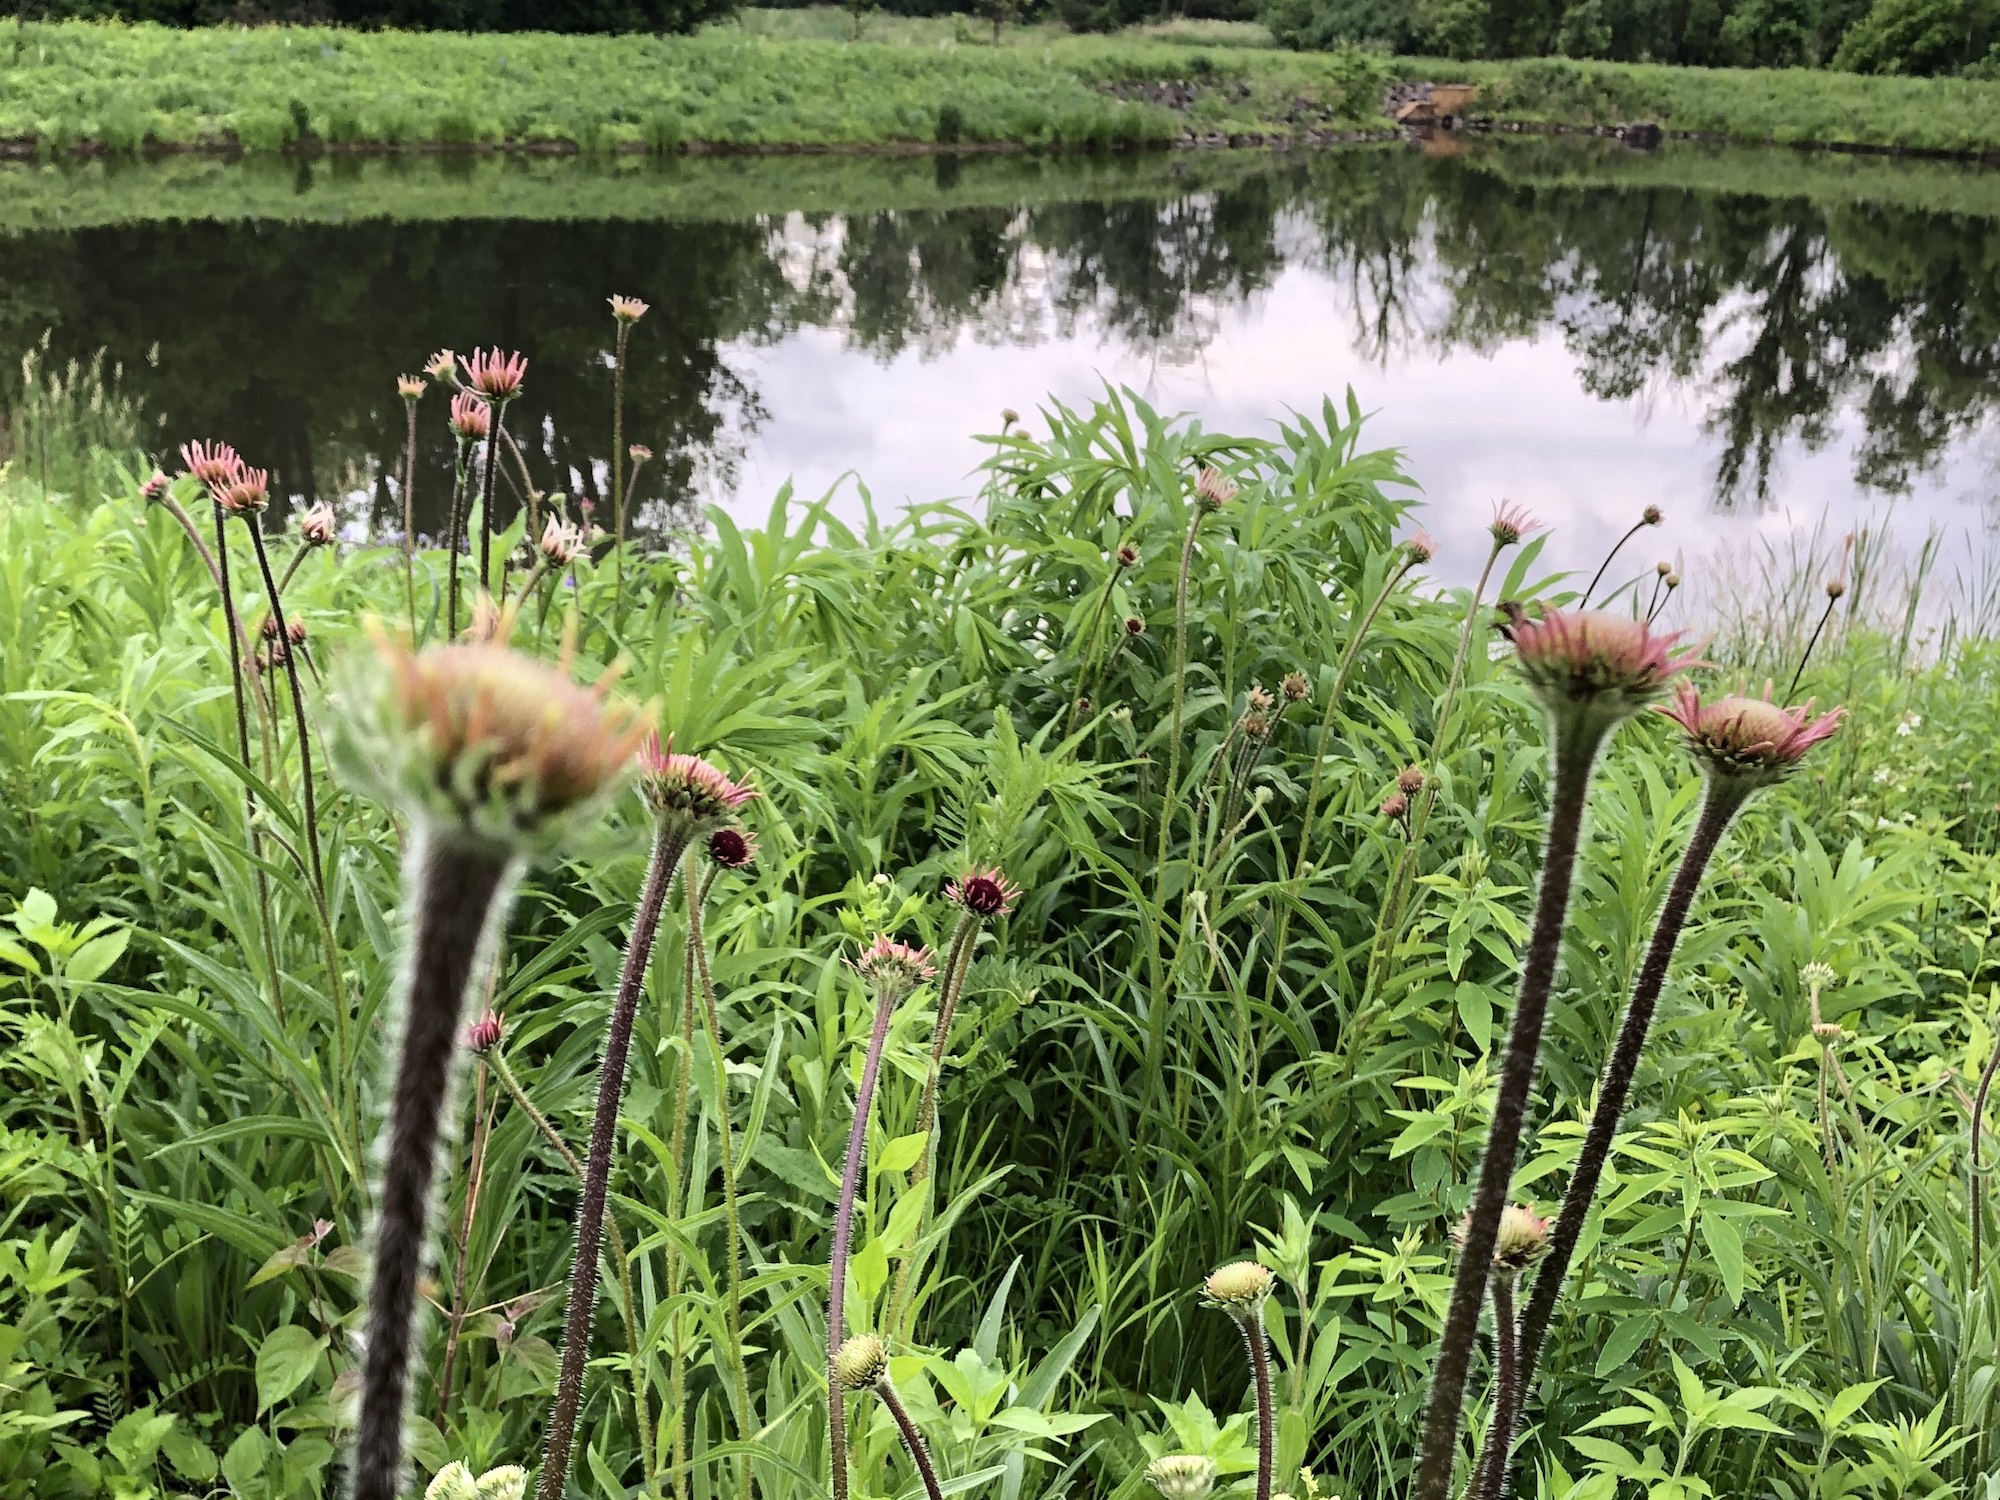 Pale purple coneflower on bank of Retaining Pond on corner of Nakoma Road and Manitou Way on June 12, 2019.